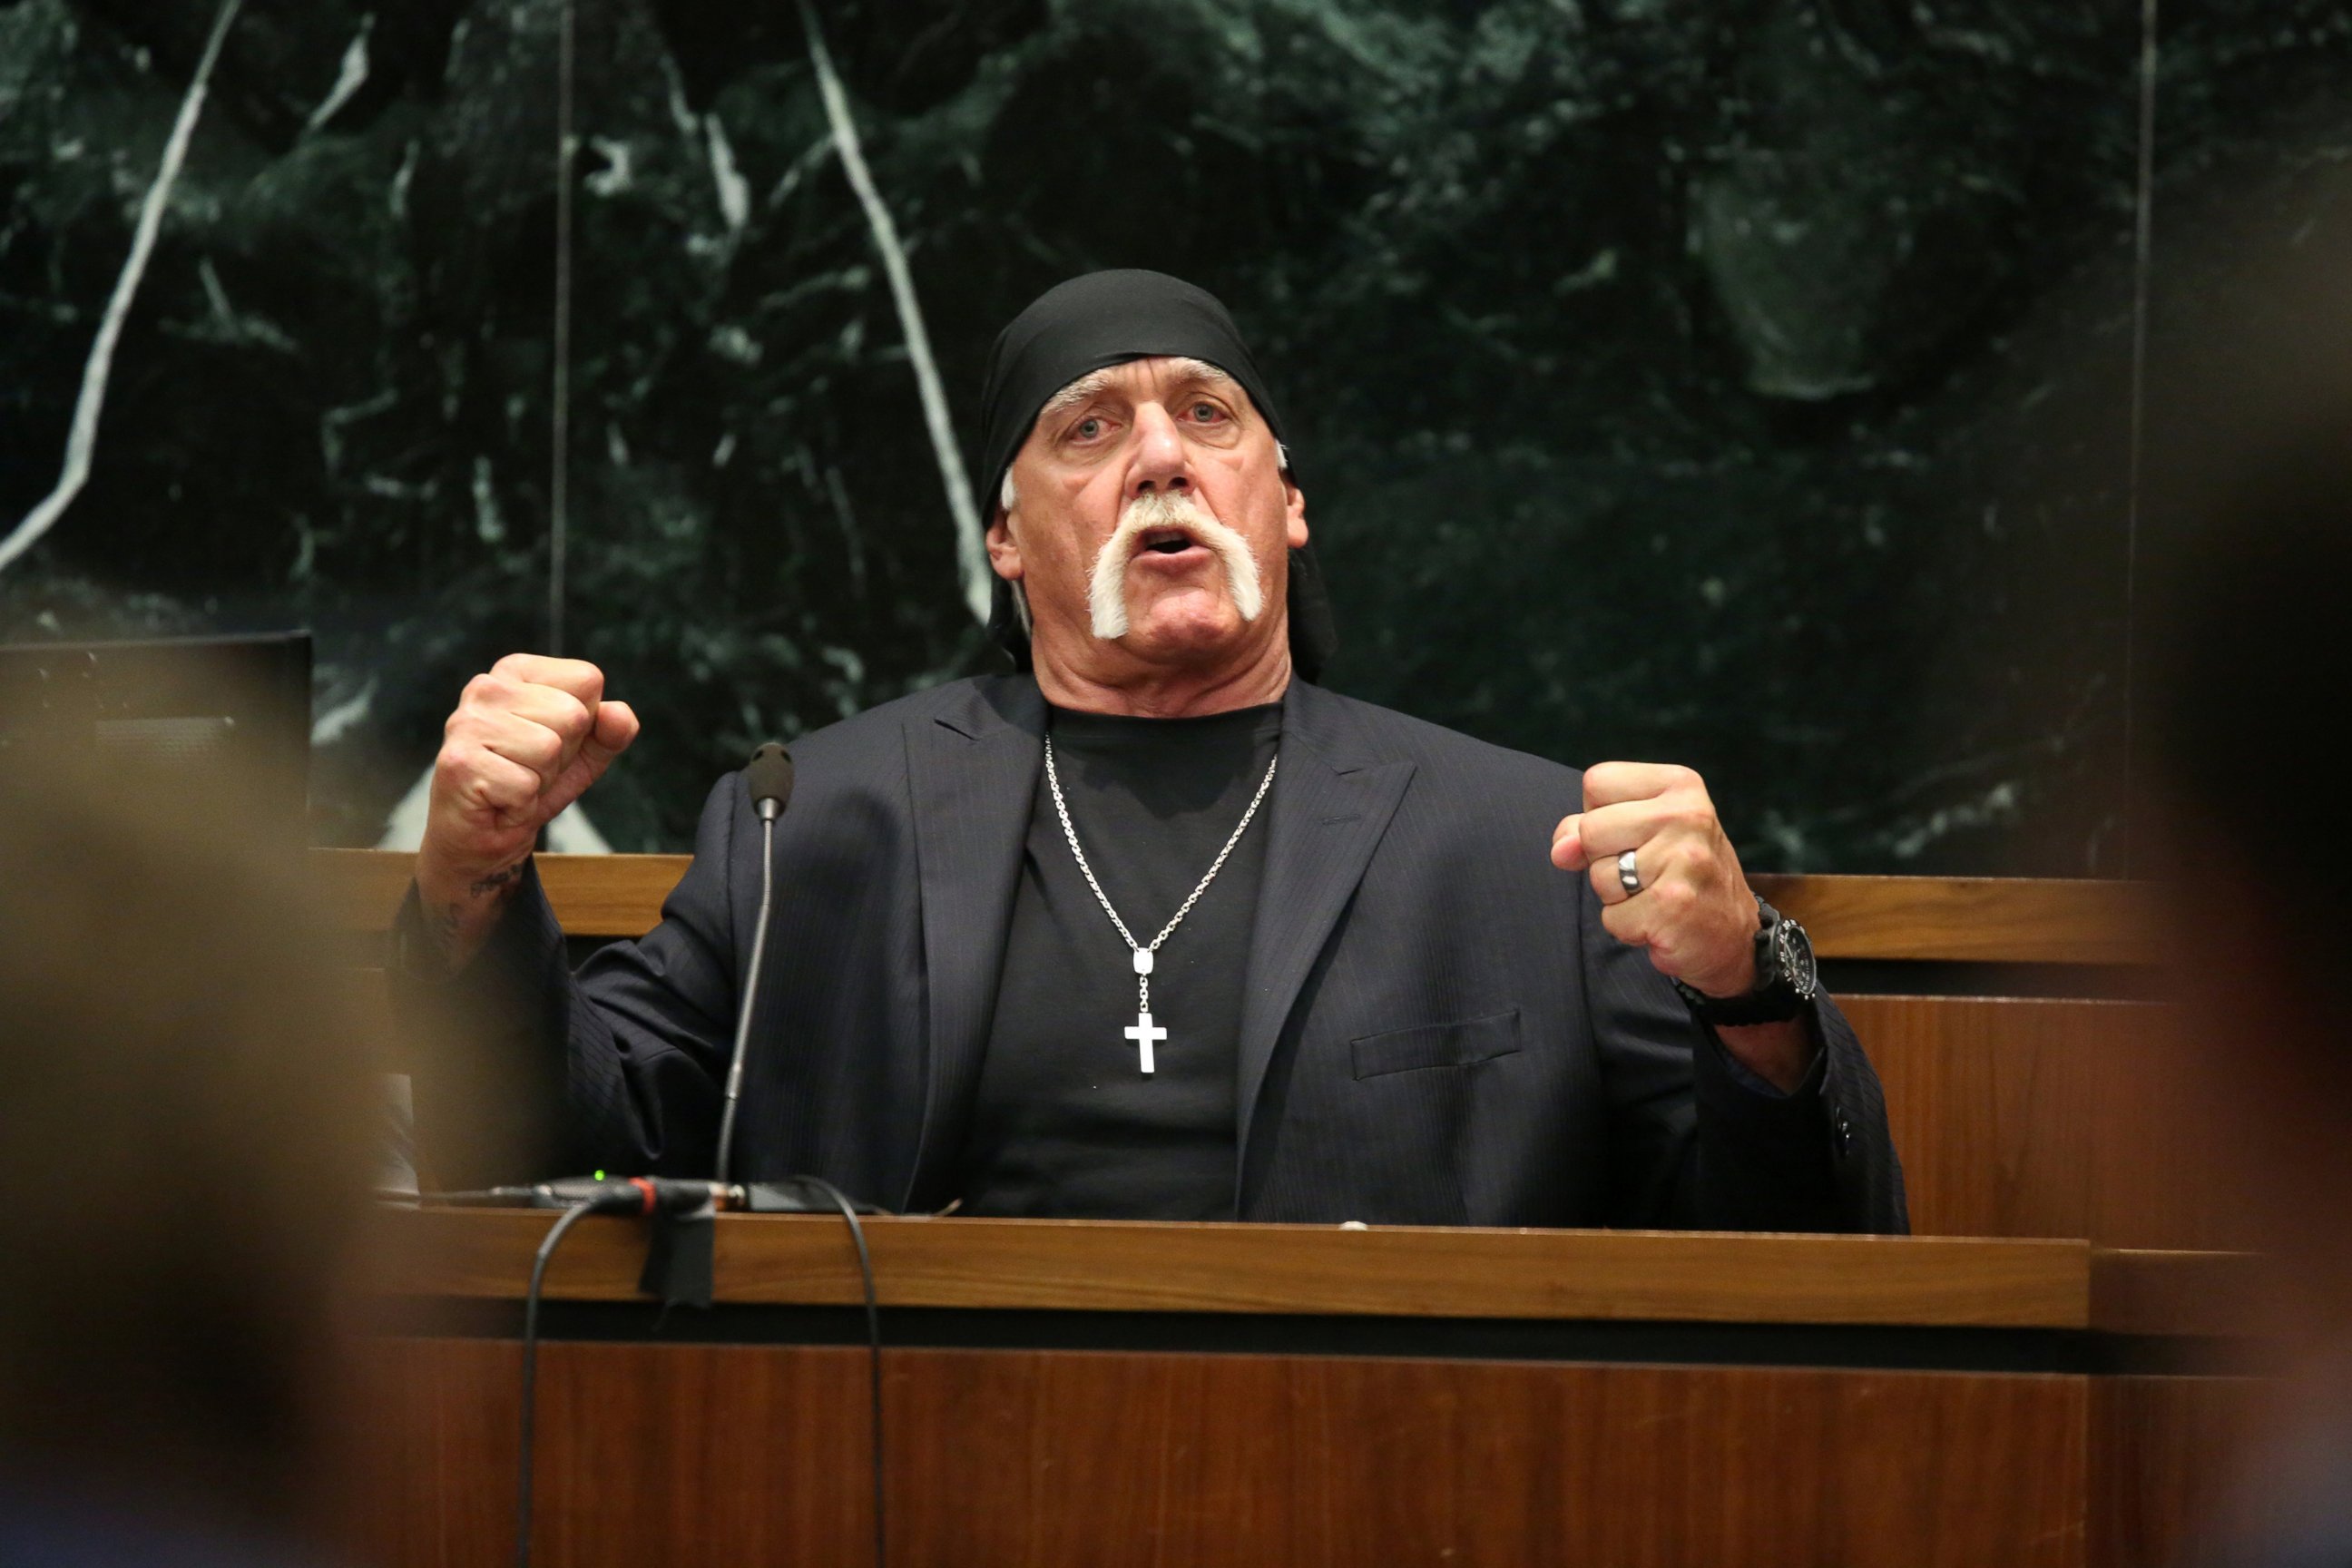 PHOTO: Terry Bollea, aka Hulk Hogan, testifies in court during his trial against Gawker Media at the Pinellas County Courthouse, March 8, 2016 in St Petersburg, Fla. 